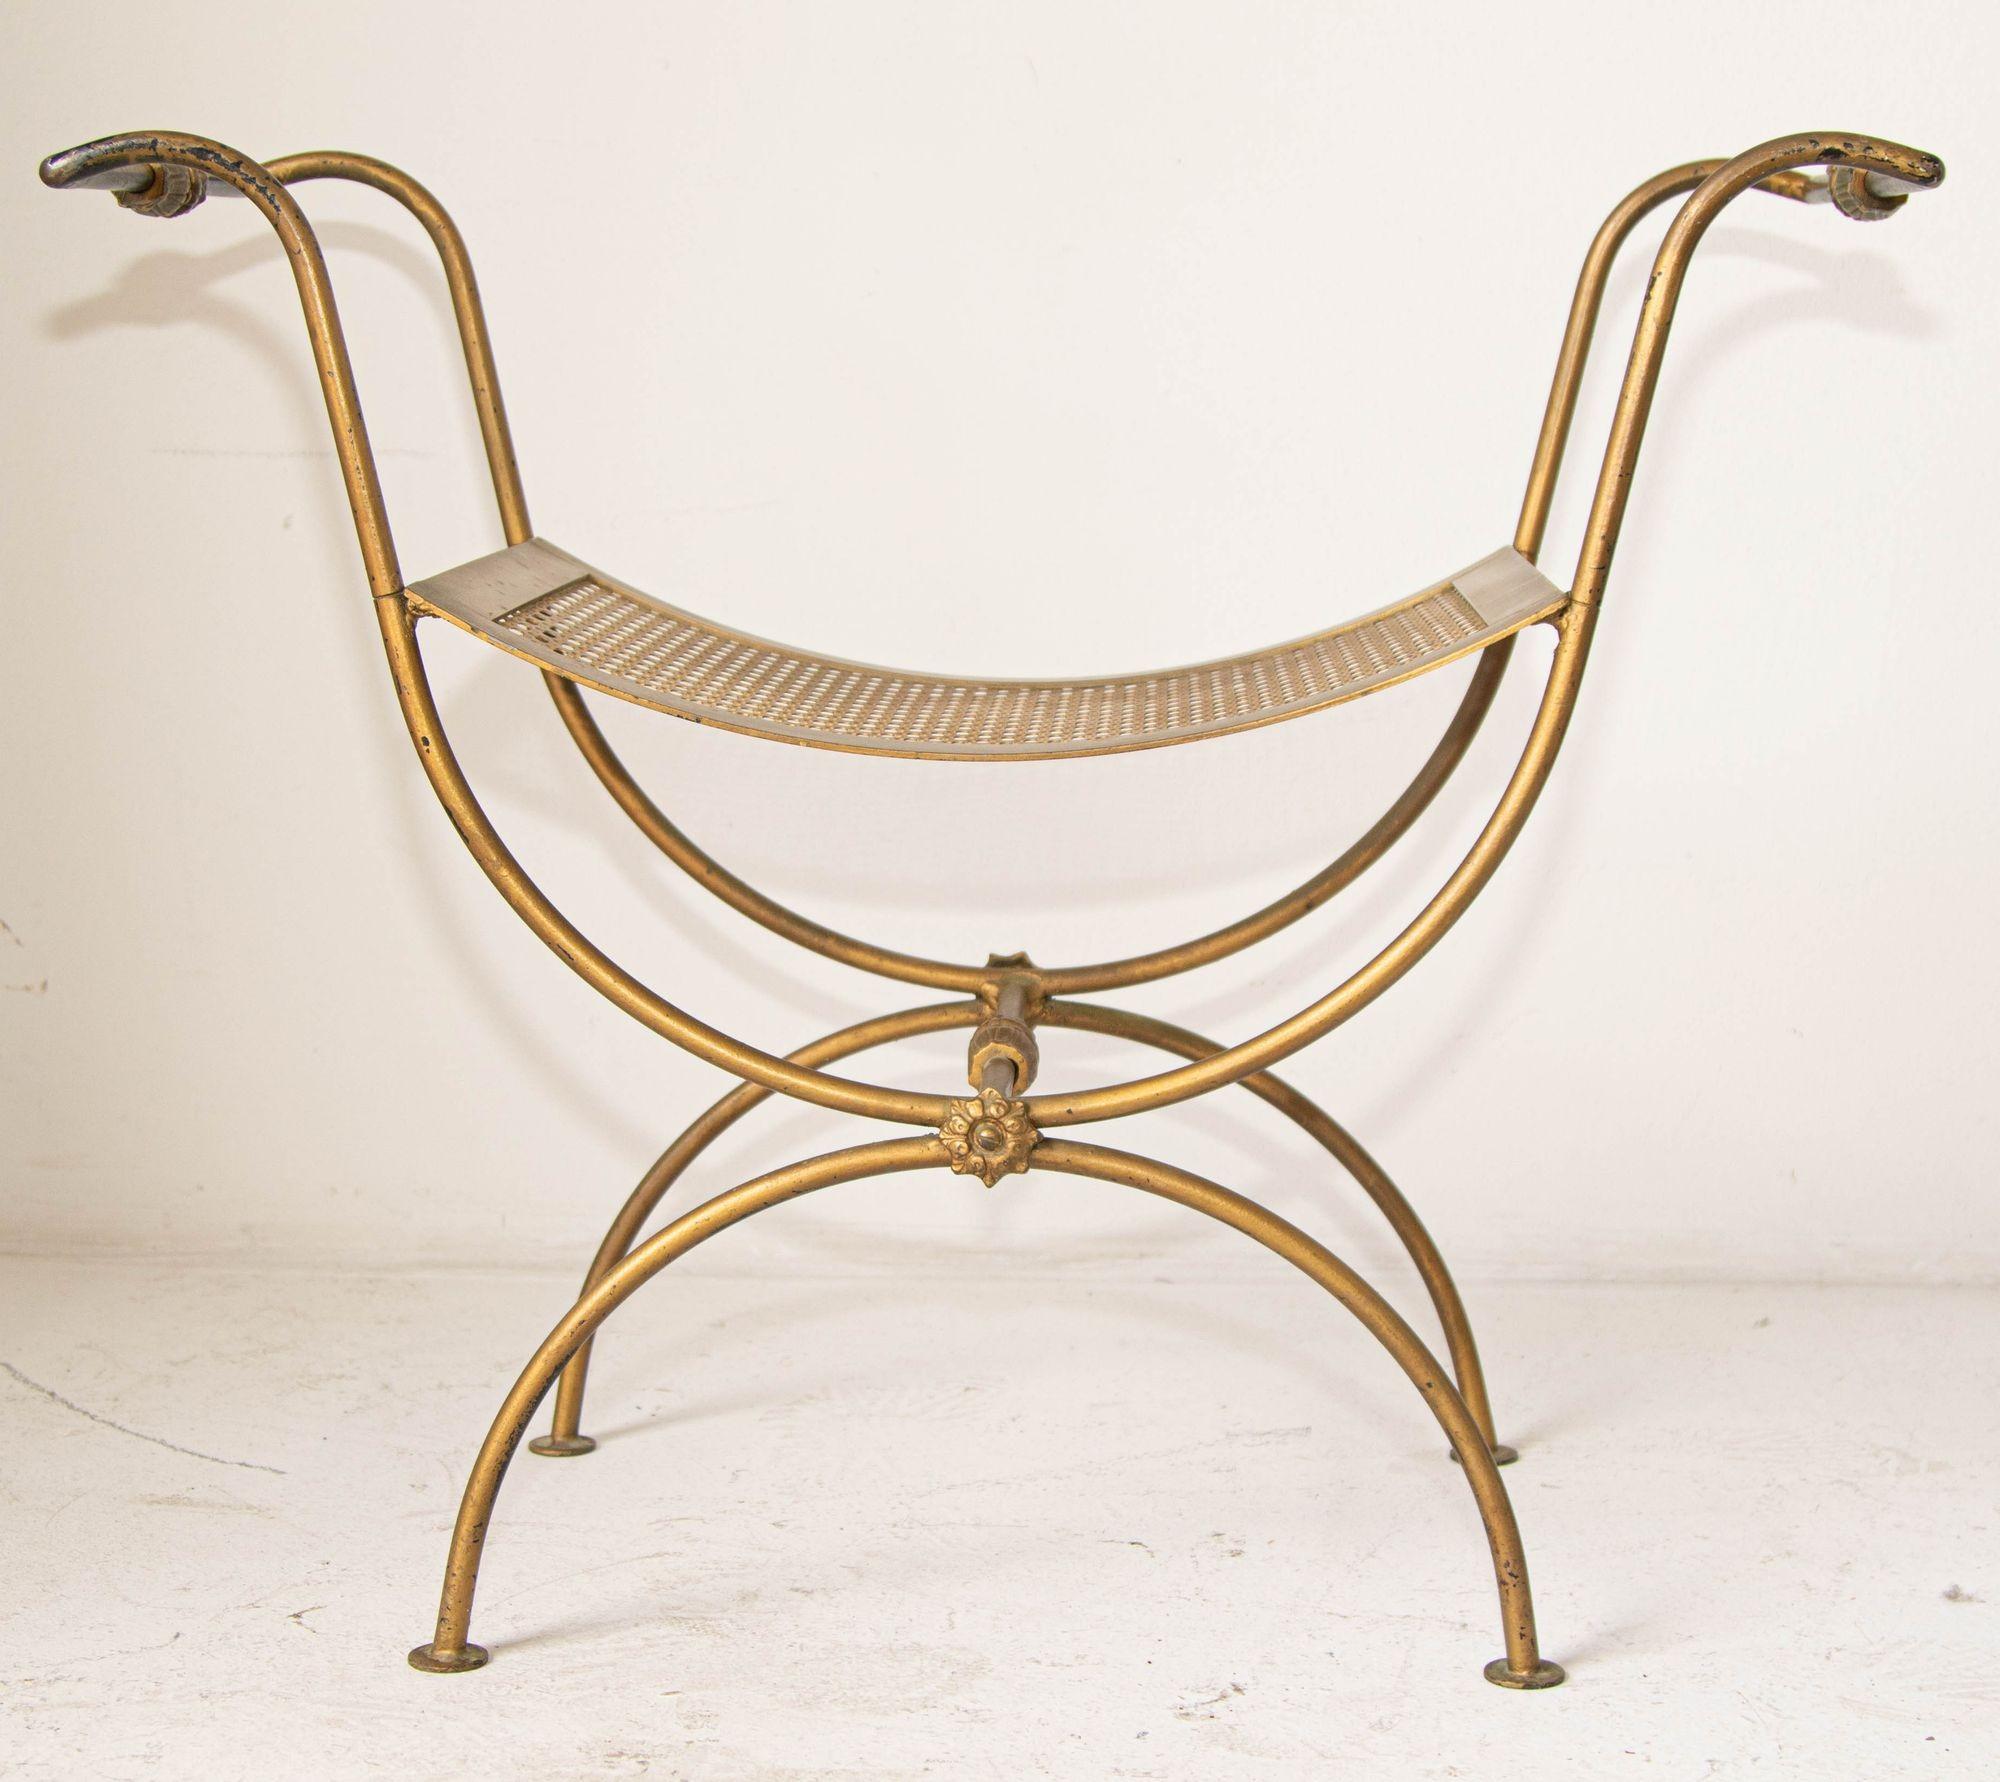 Vintage midcentury Hollywood Regency, Italian gilt metal bench with rich patina.
Midcentury gilt metal curule form bench with a curved base and curved seat, accented with brass rosettes.
The curule bench is a design well-noted for its use by Roman